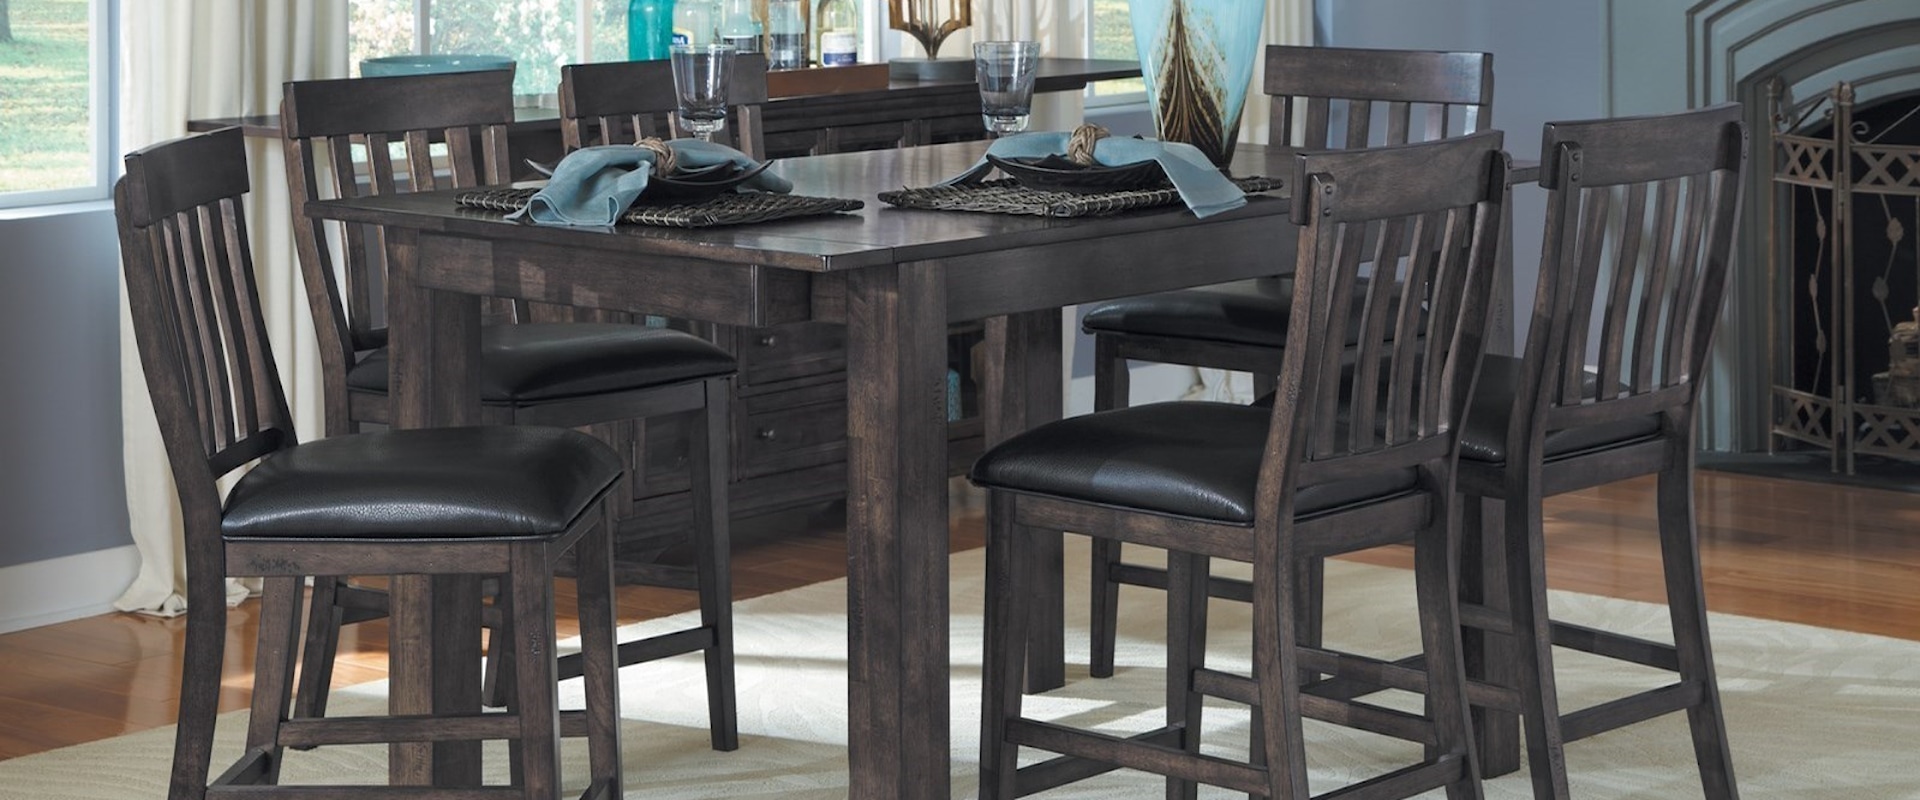 7 Piece Gathering Table and Slatback Chairs Set